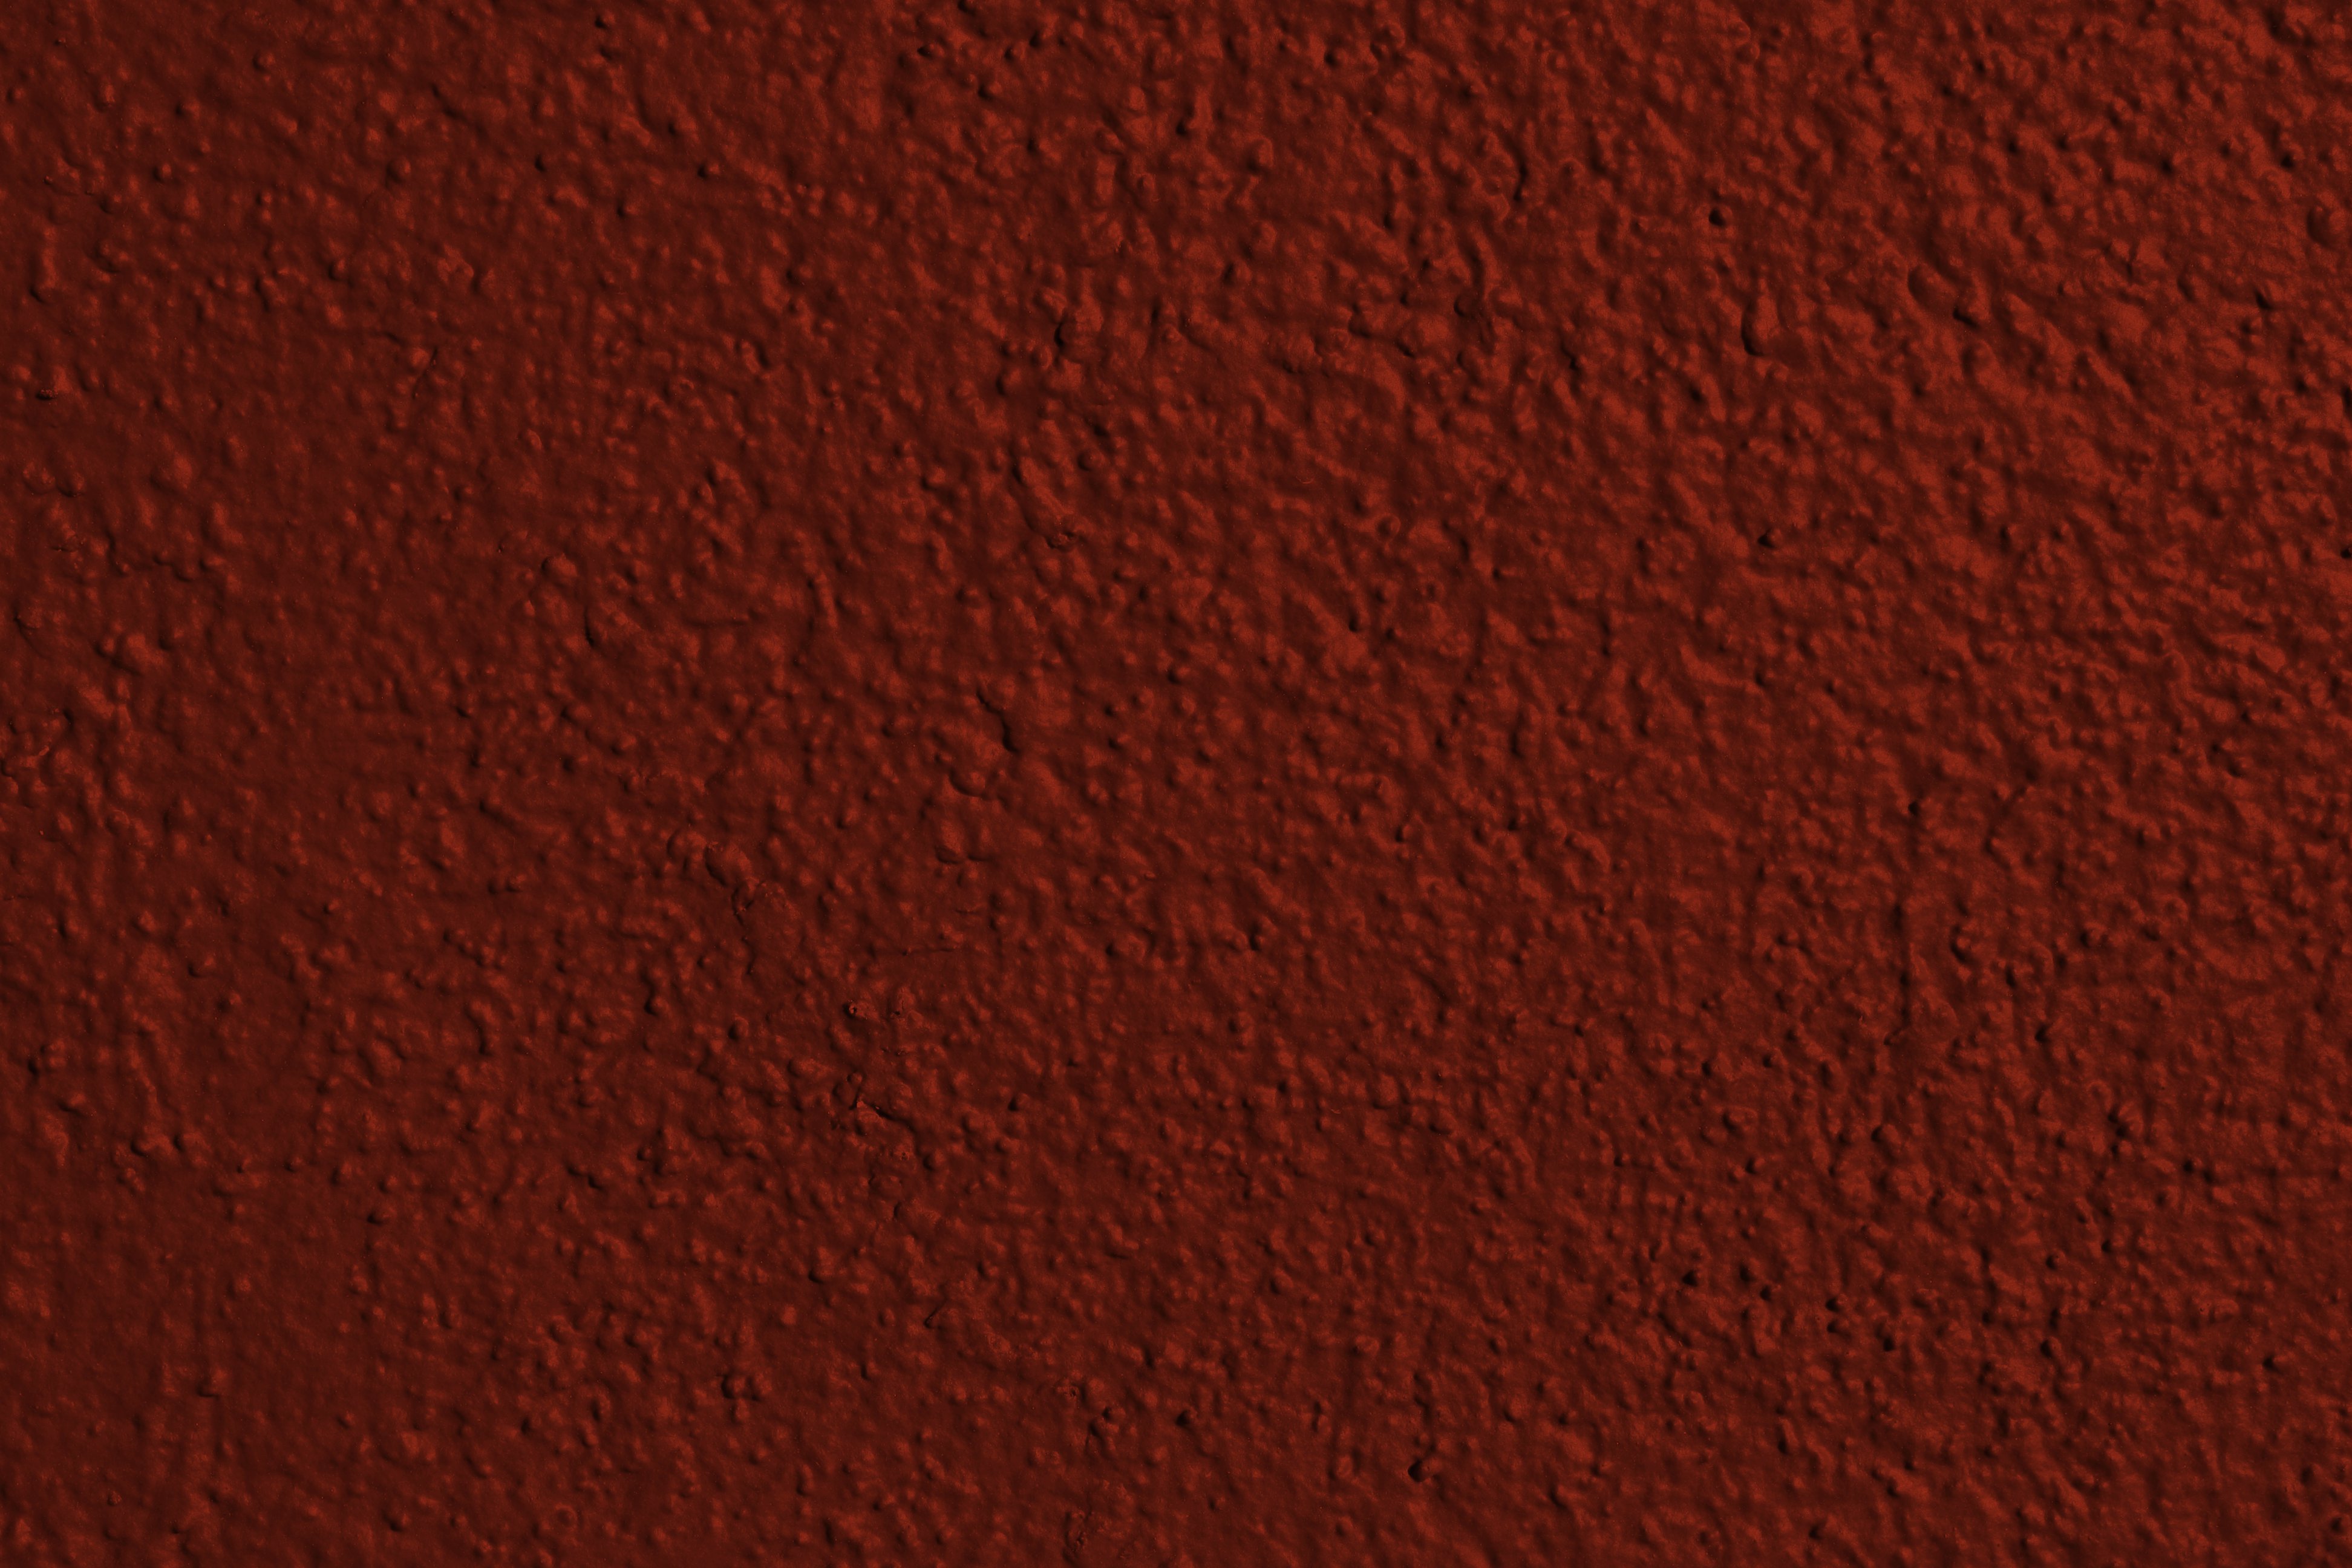 Dark Brick Red Colored Painted Wall Texture Photograph - Homes ...